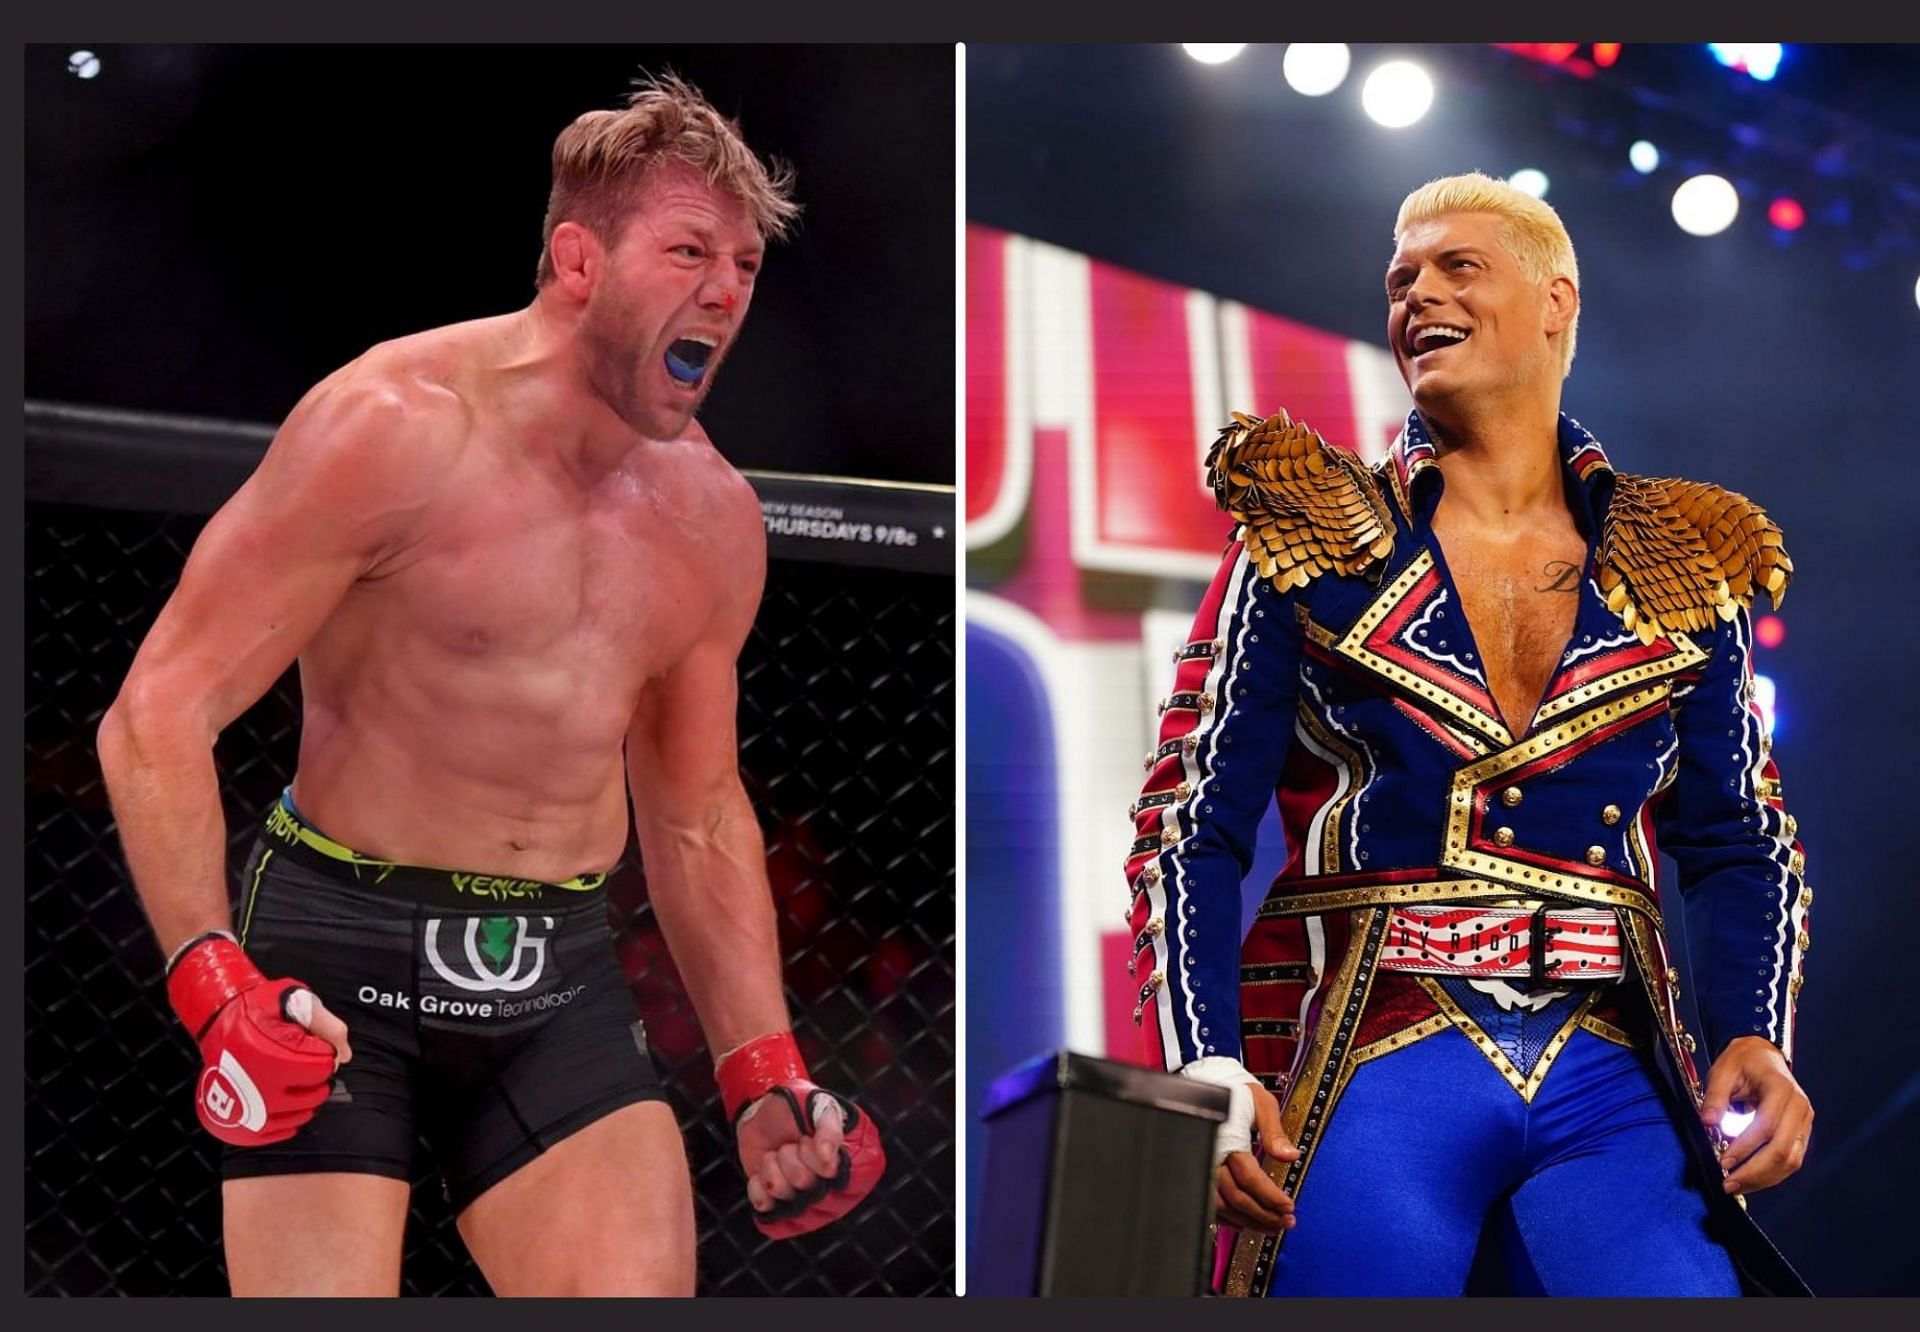 AEW stars like Jake Hager and Cody Rhodes desperately need to switch up their act